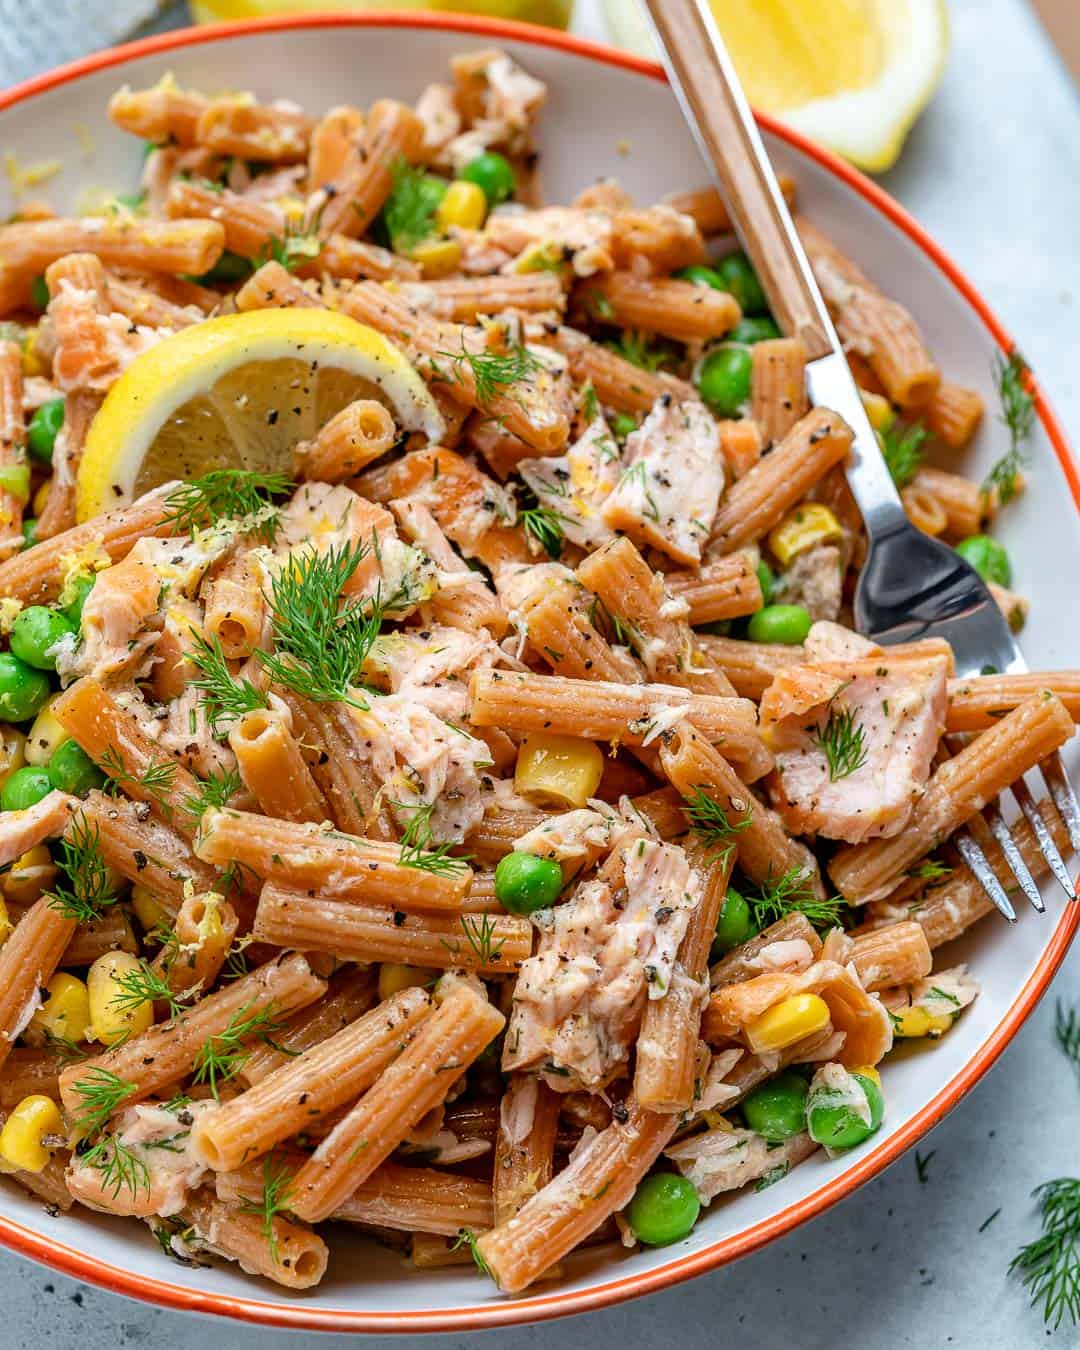 salmon and pasta recipe, with peas and corn